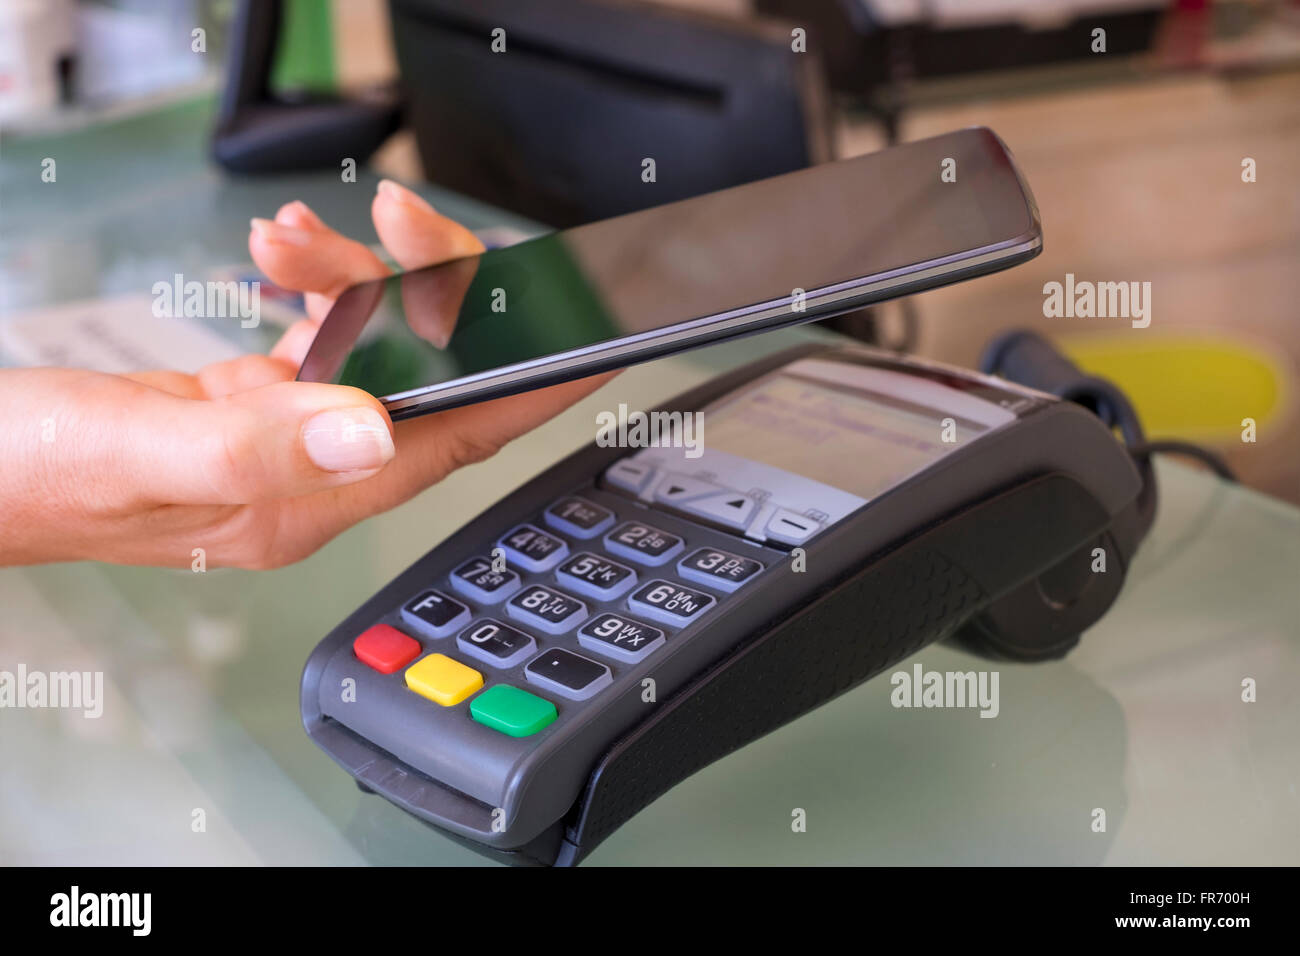 Woman paying with NFC technology on mobile phone, beautician, shop, market. Contactless payment Stock Photo